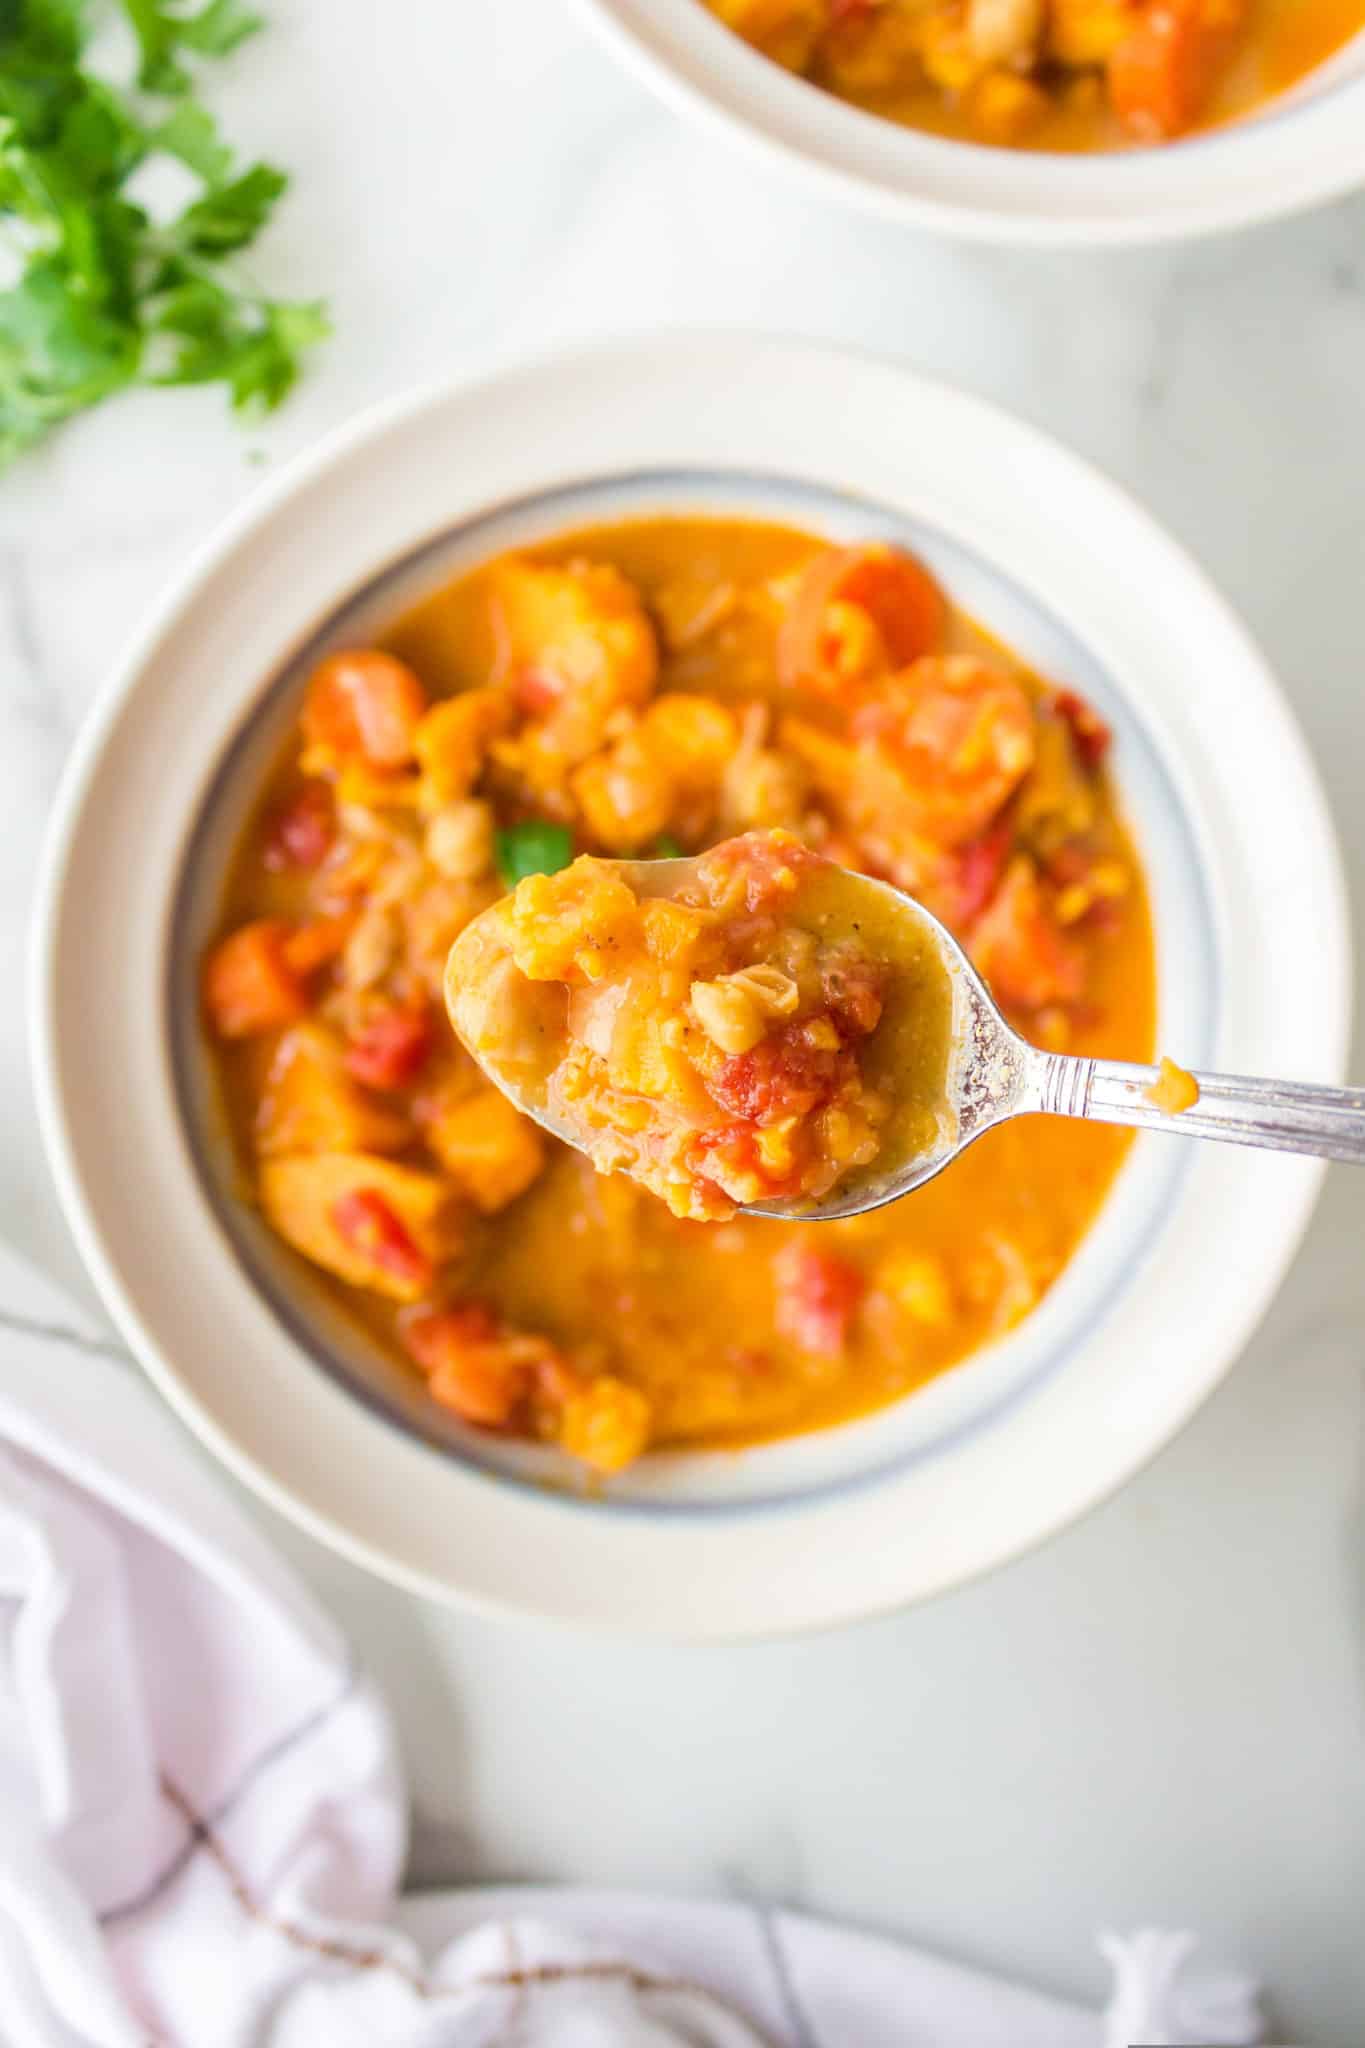 A spoonful of vegan chickpea stew